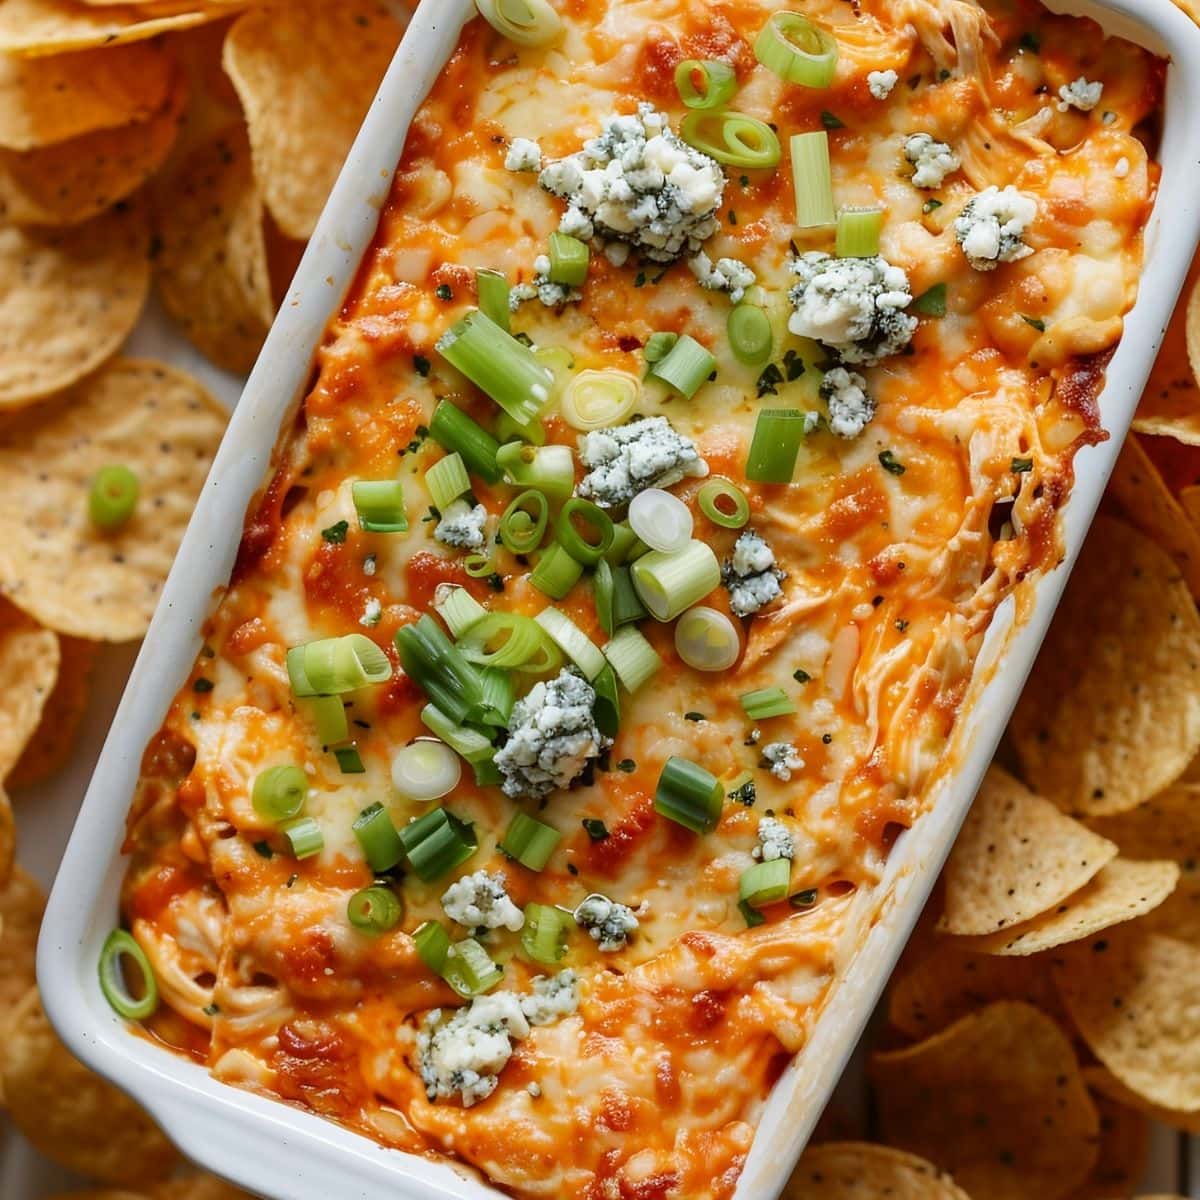 Top View of Frank's Buffalo Chicken Dip in a White Casserole Dish with Green Onions and Bleu cheese and Chips All Around the Dish